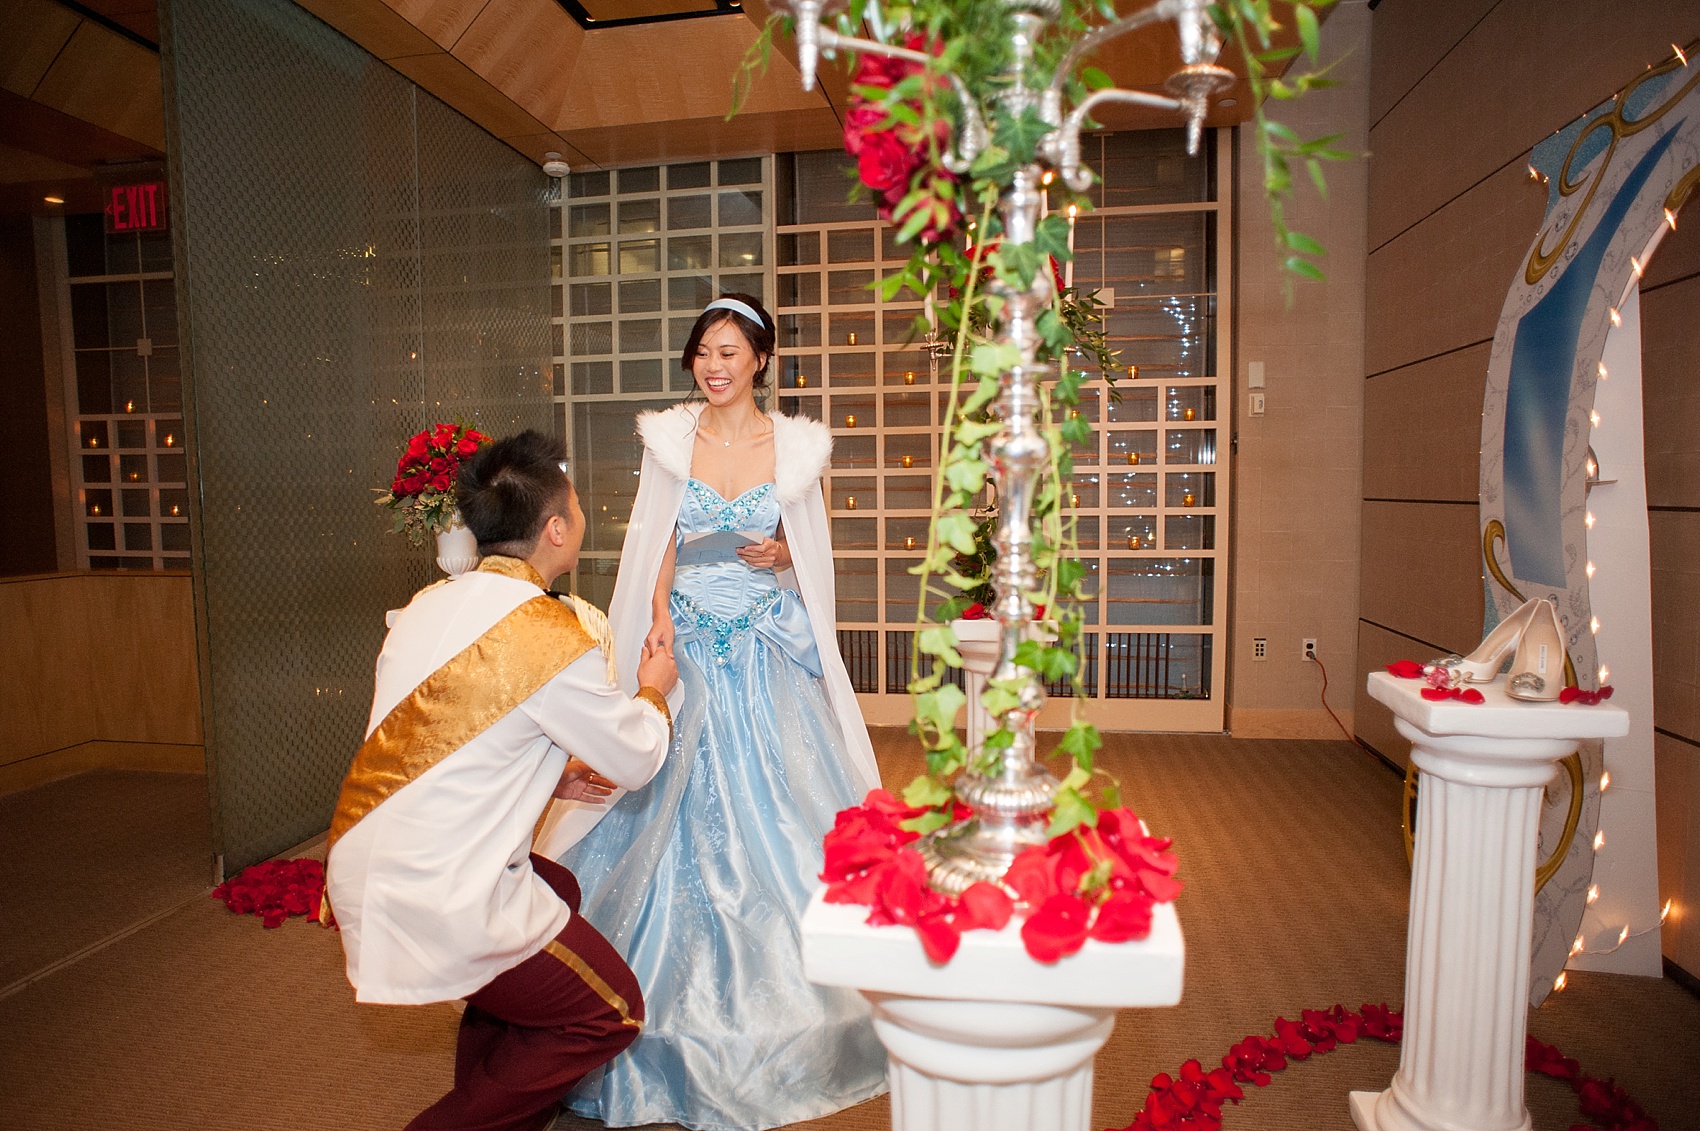 Prince Charming and Cinderella for a Disney proposal at Le Bernadin captured by Mikkel Paige, New York City wedding photographer. Coordination by Brilliant Event Planning.